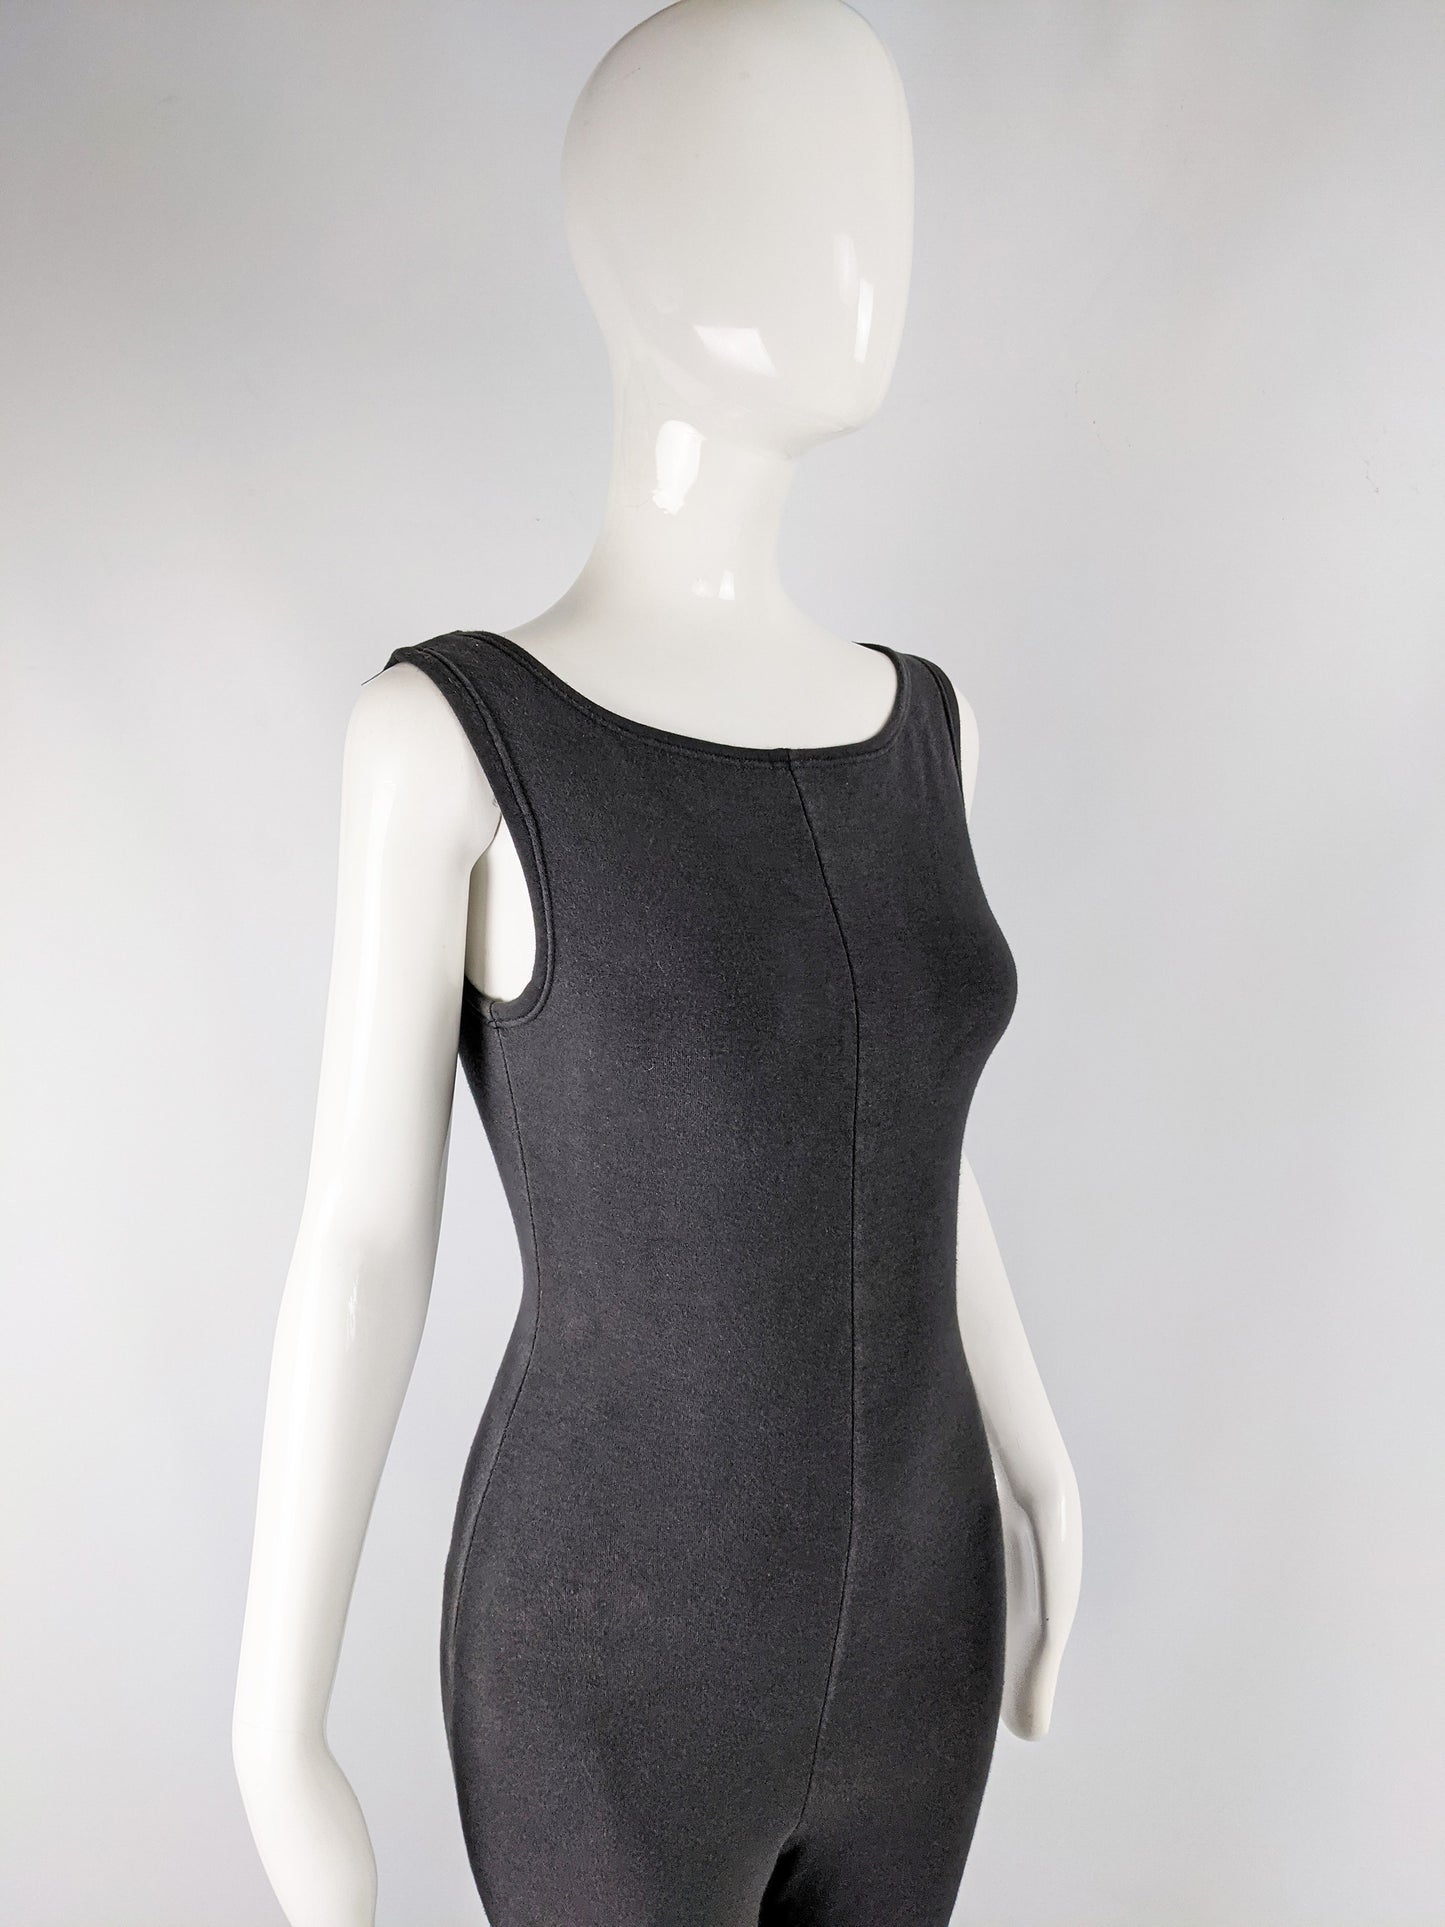 Womens Vintage Bodycon Jersey Sleeveless Catsuit, 1980s